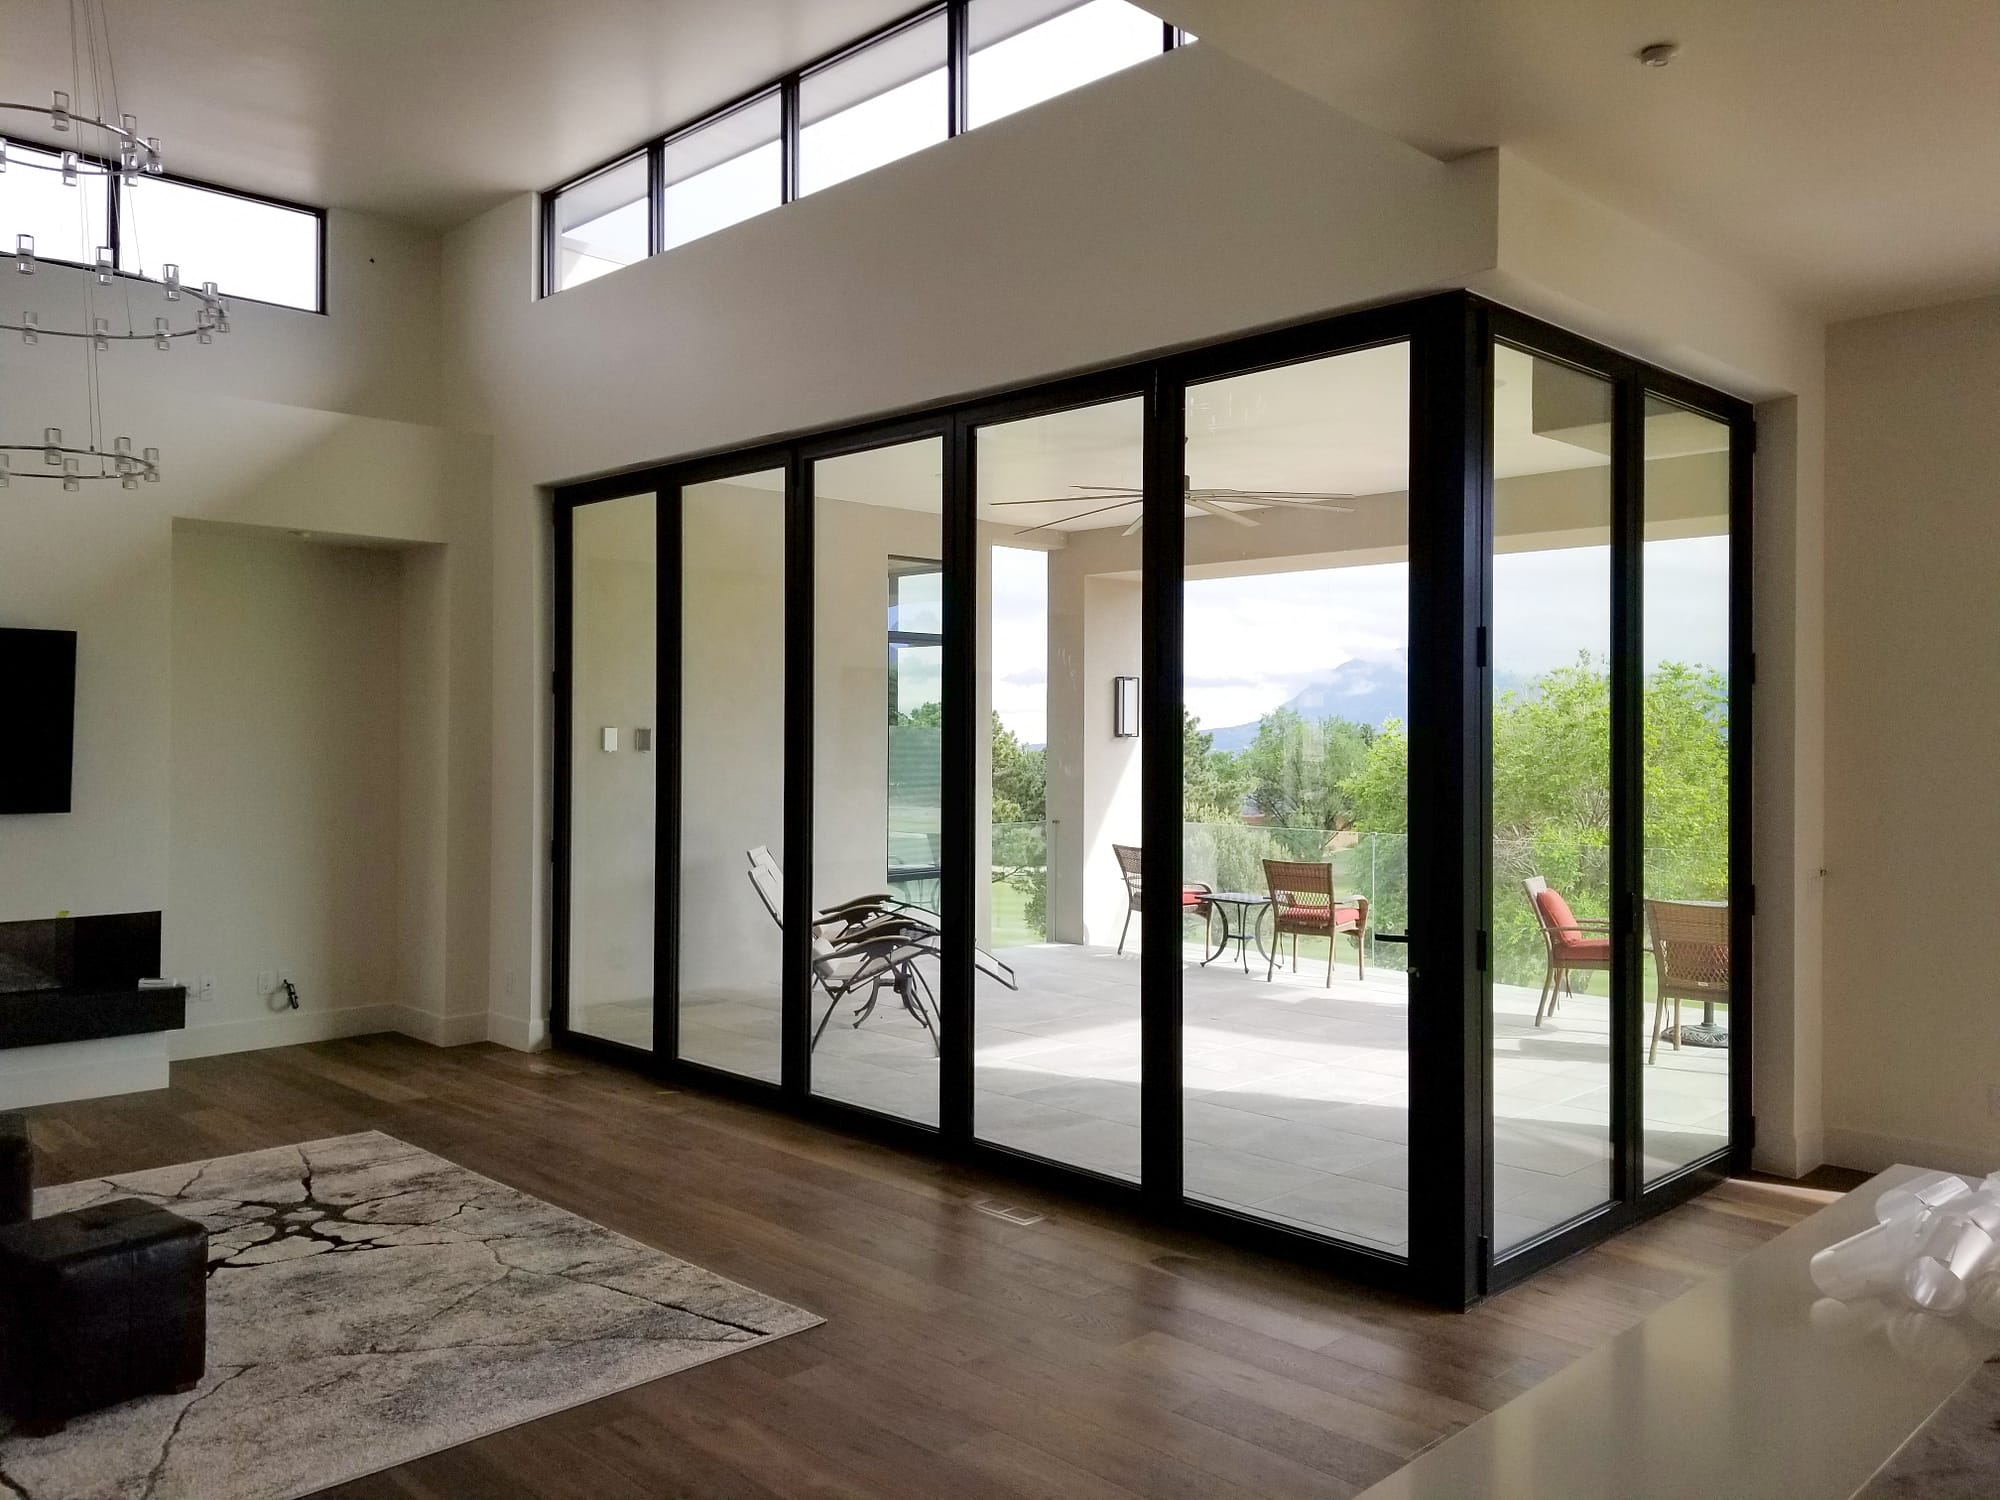 The aluminum corner meet folding door system allows for the homeowner to enjoy the spectacular views.